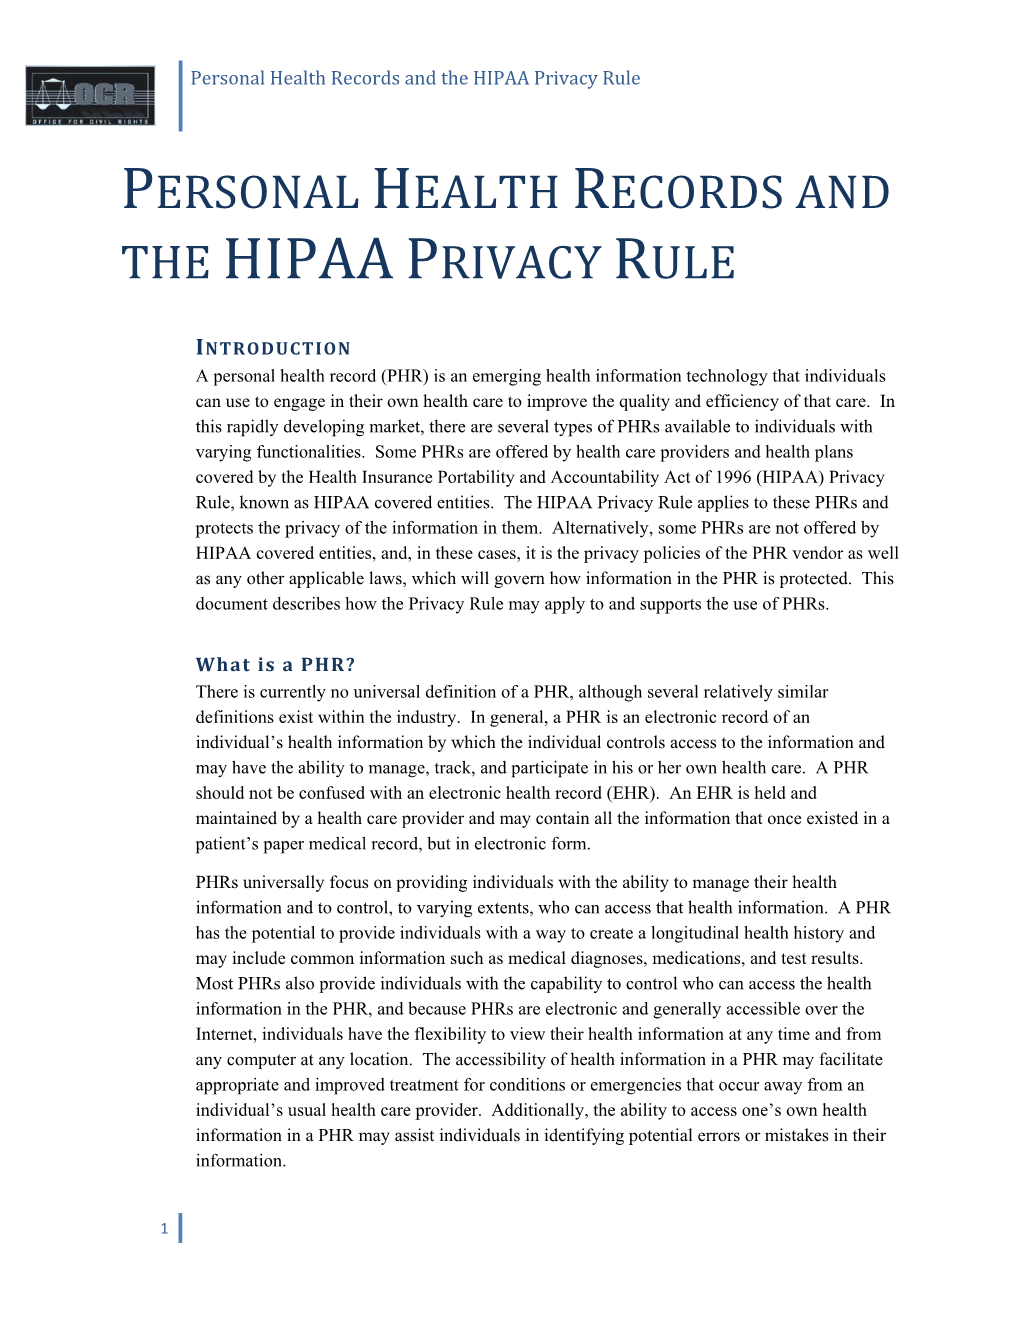 Personal Health Records (Phrs) and the HIPAA Privacy Rule